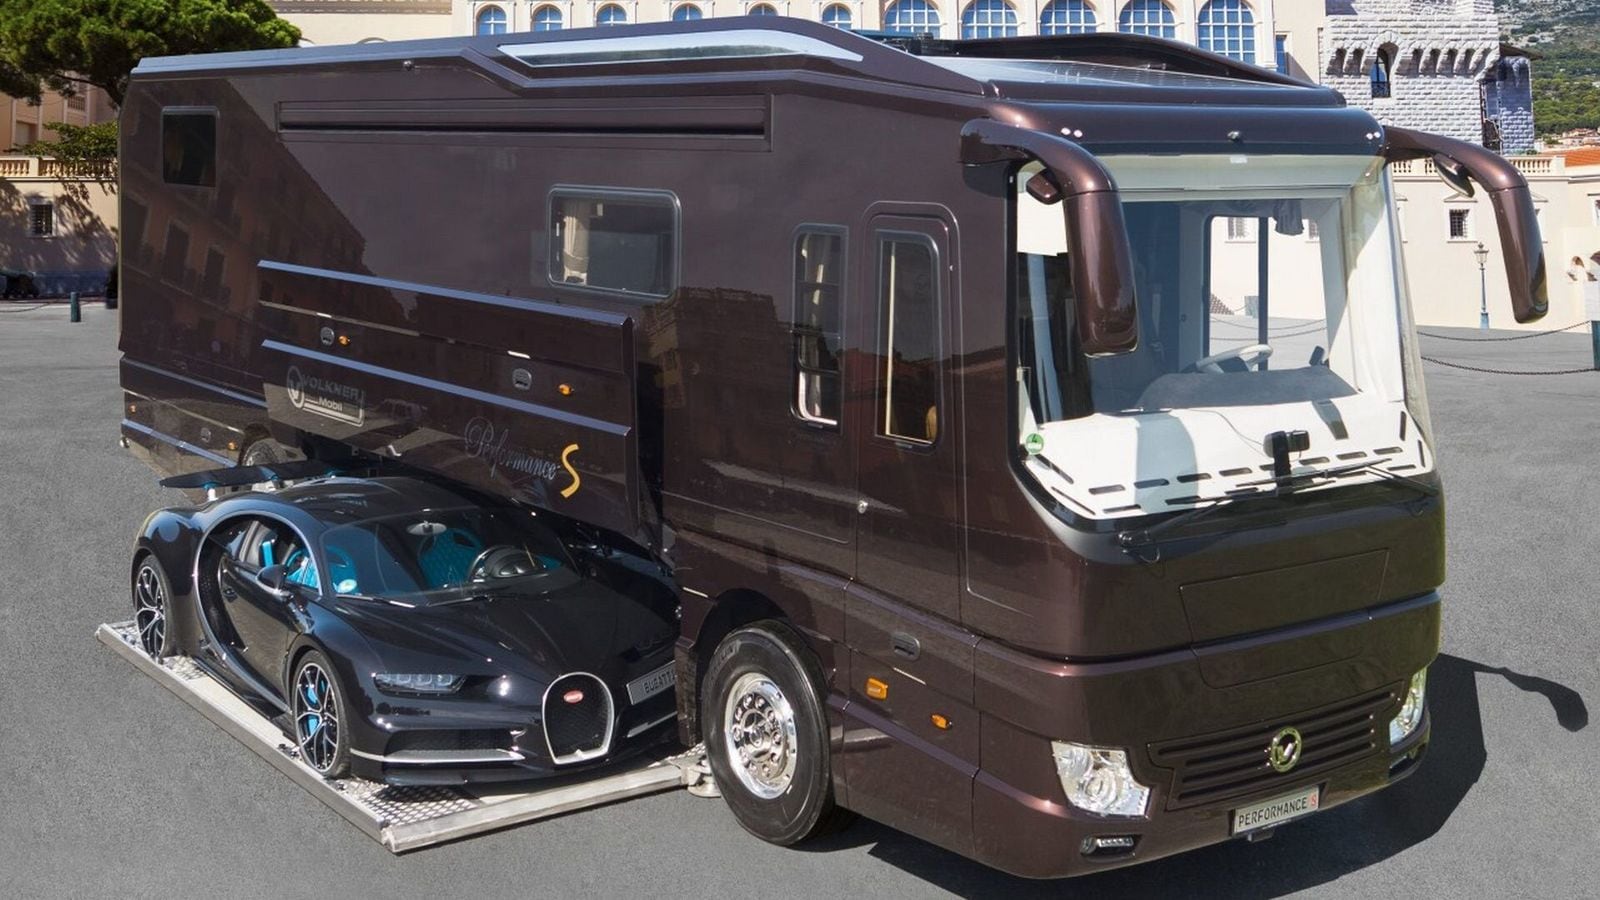 This $2.4 million caravan can house a $3 million Bugatti Chiron in its ...